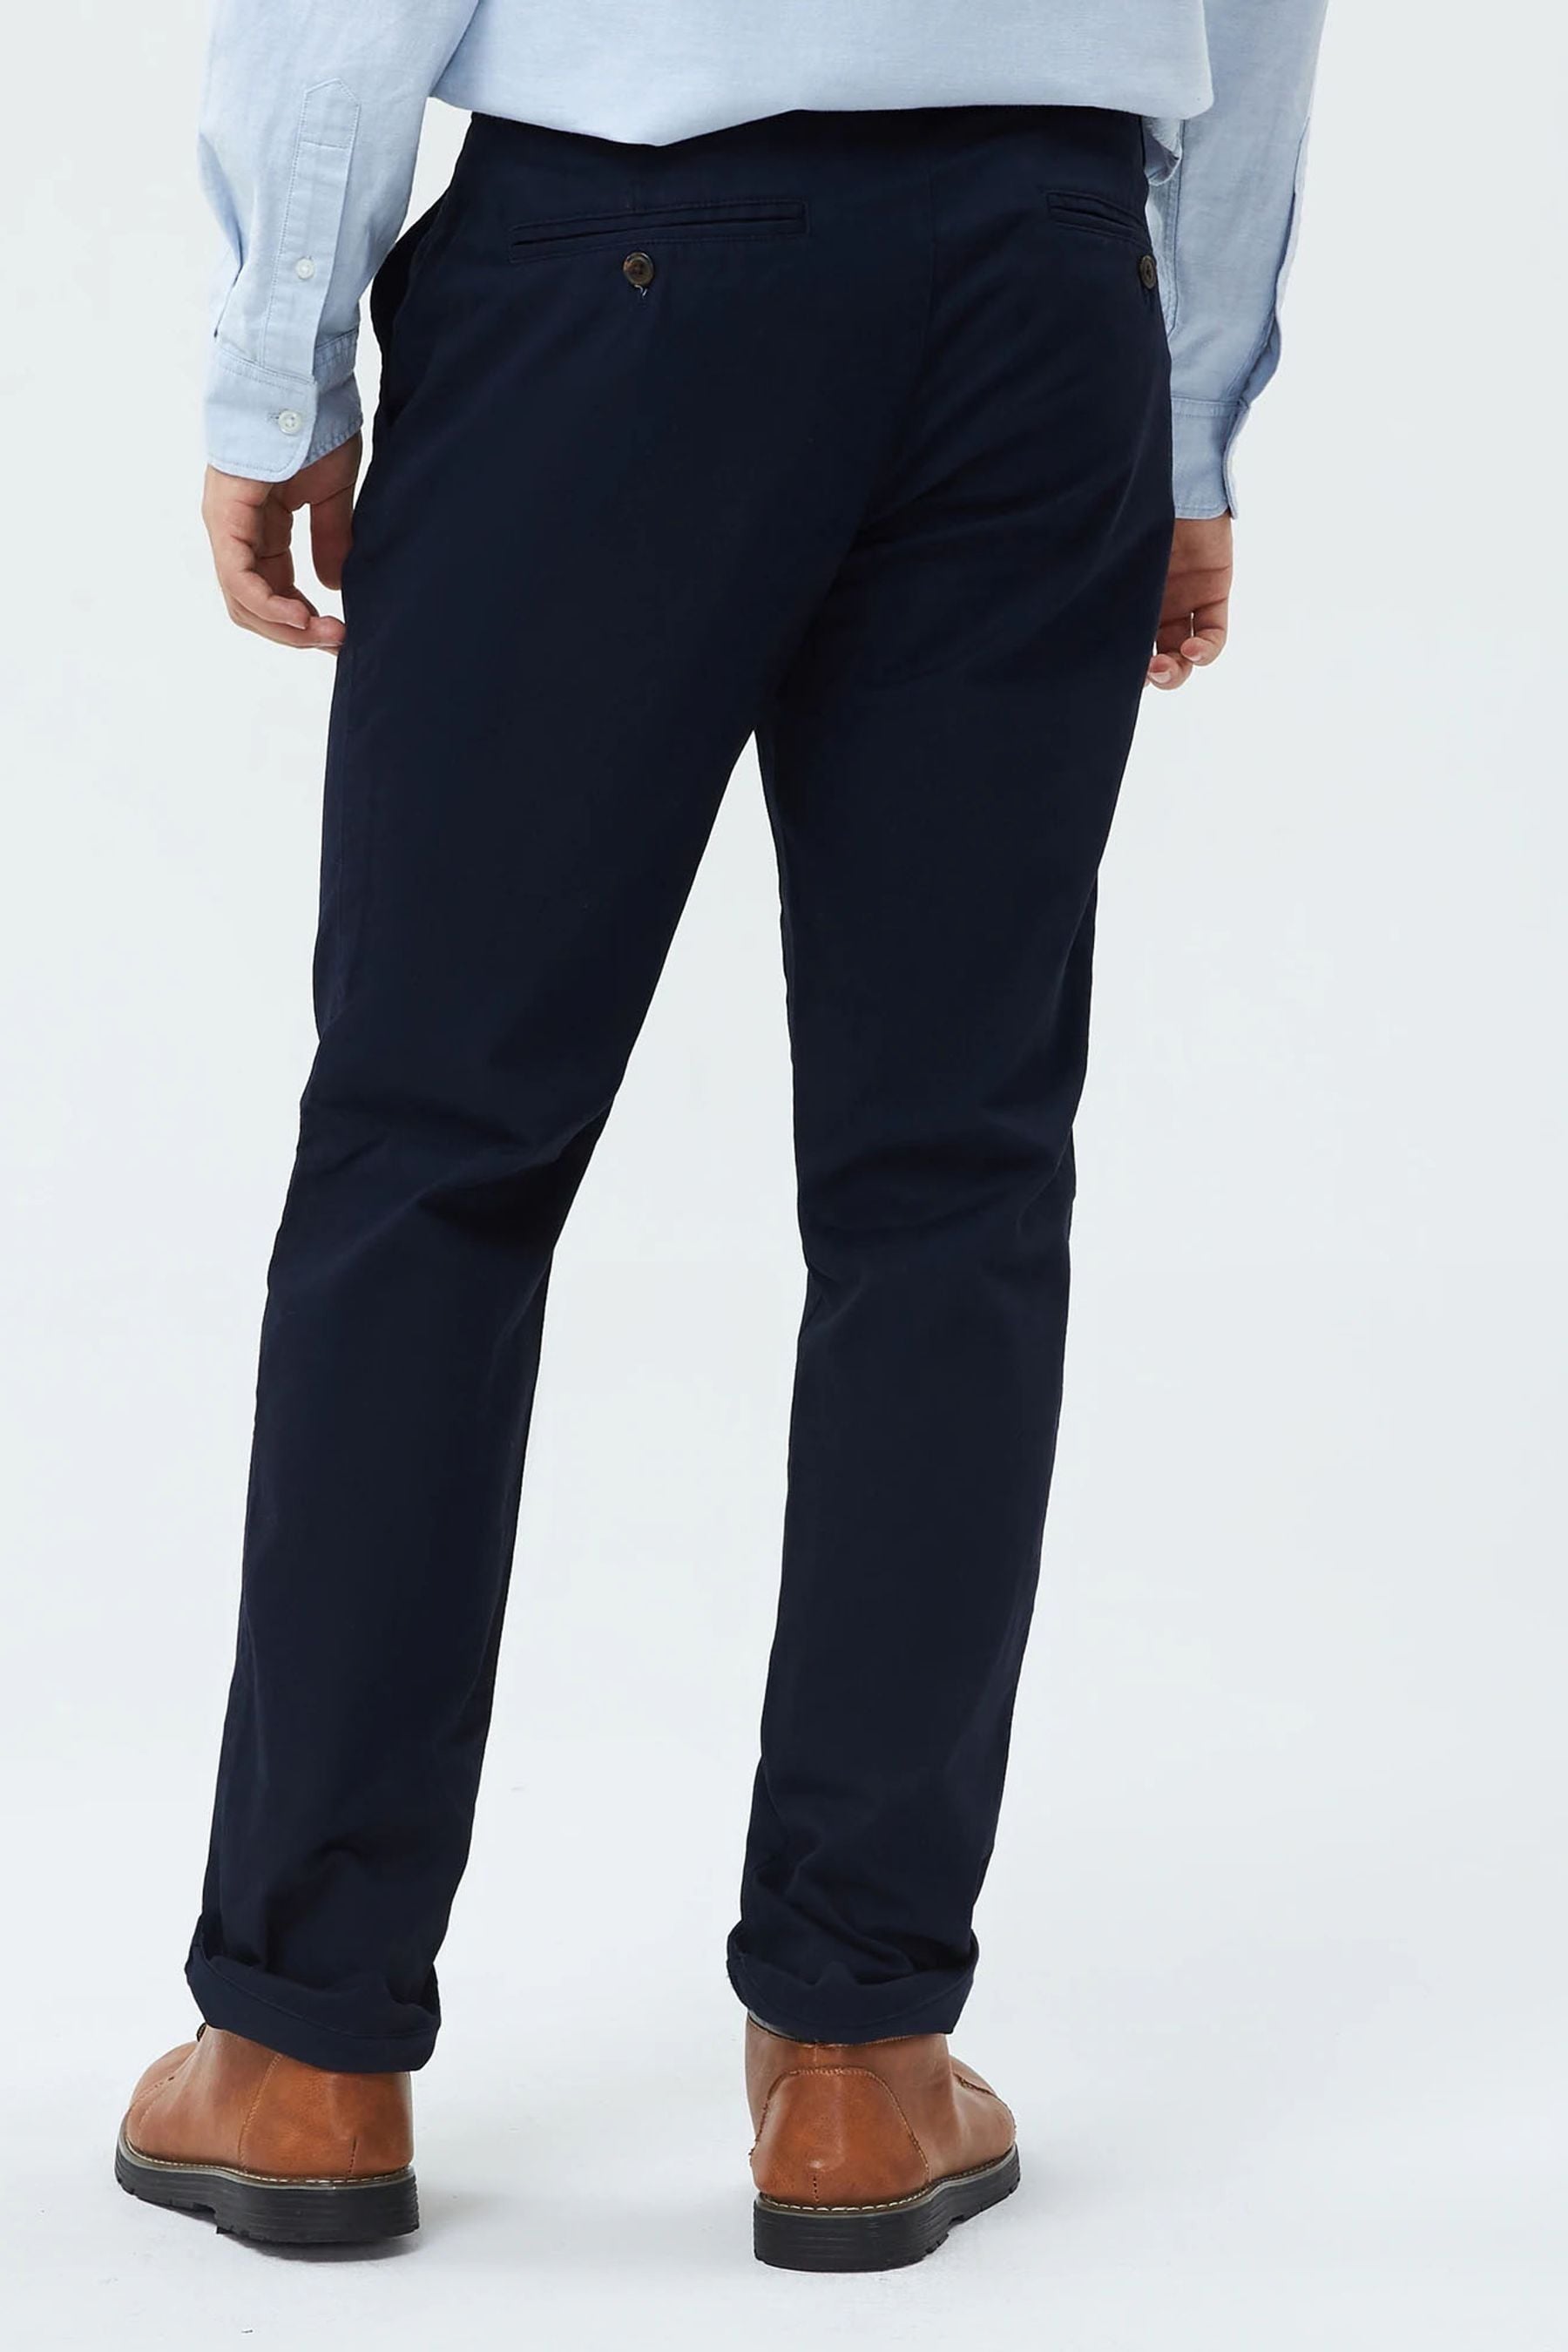 Buy Gap Blue Straight Fit Essential Chinos from the Next UK online shop